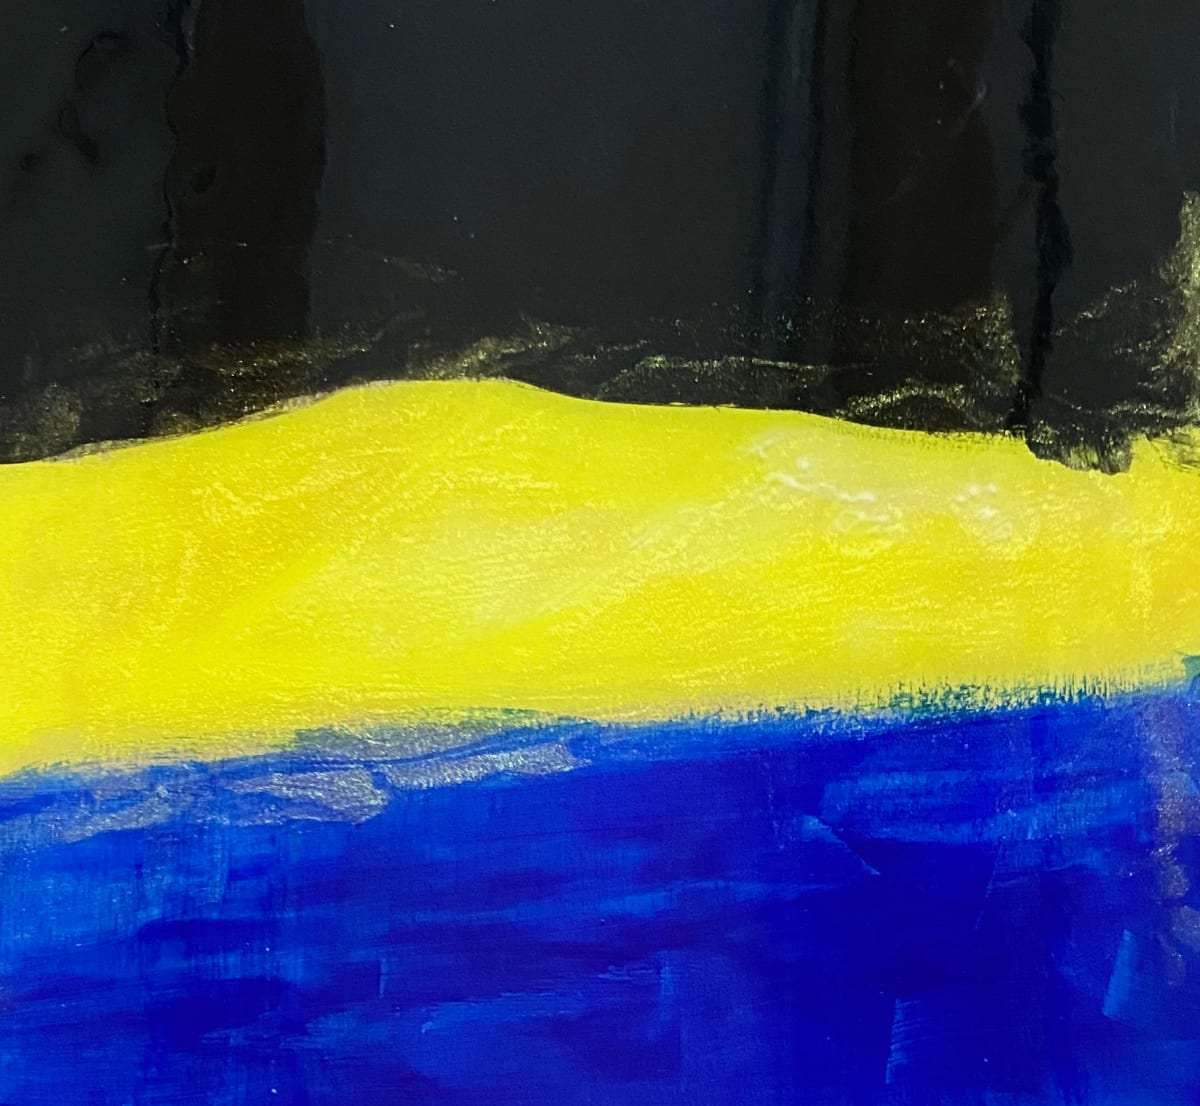 Unexpected Series - #2 by Kathie Collinson  Image: This piece was created in support of the Ukrainian people. Acrylic paint with colored resin.